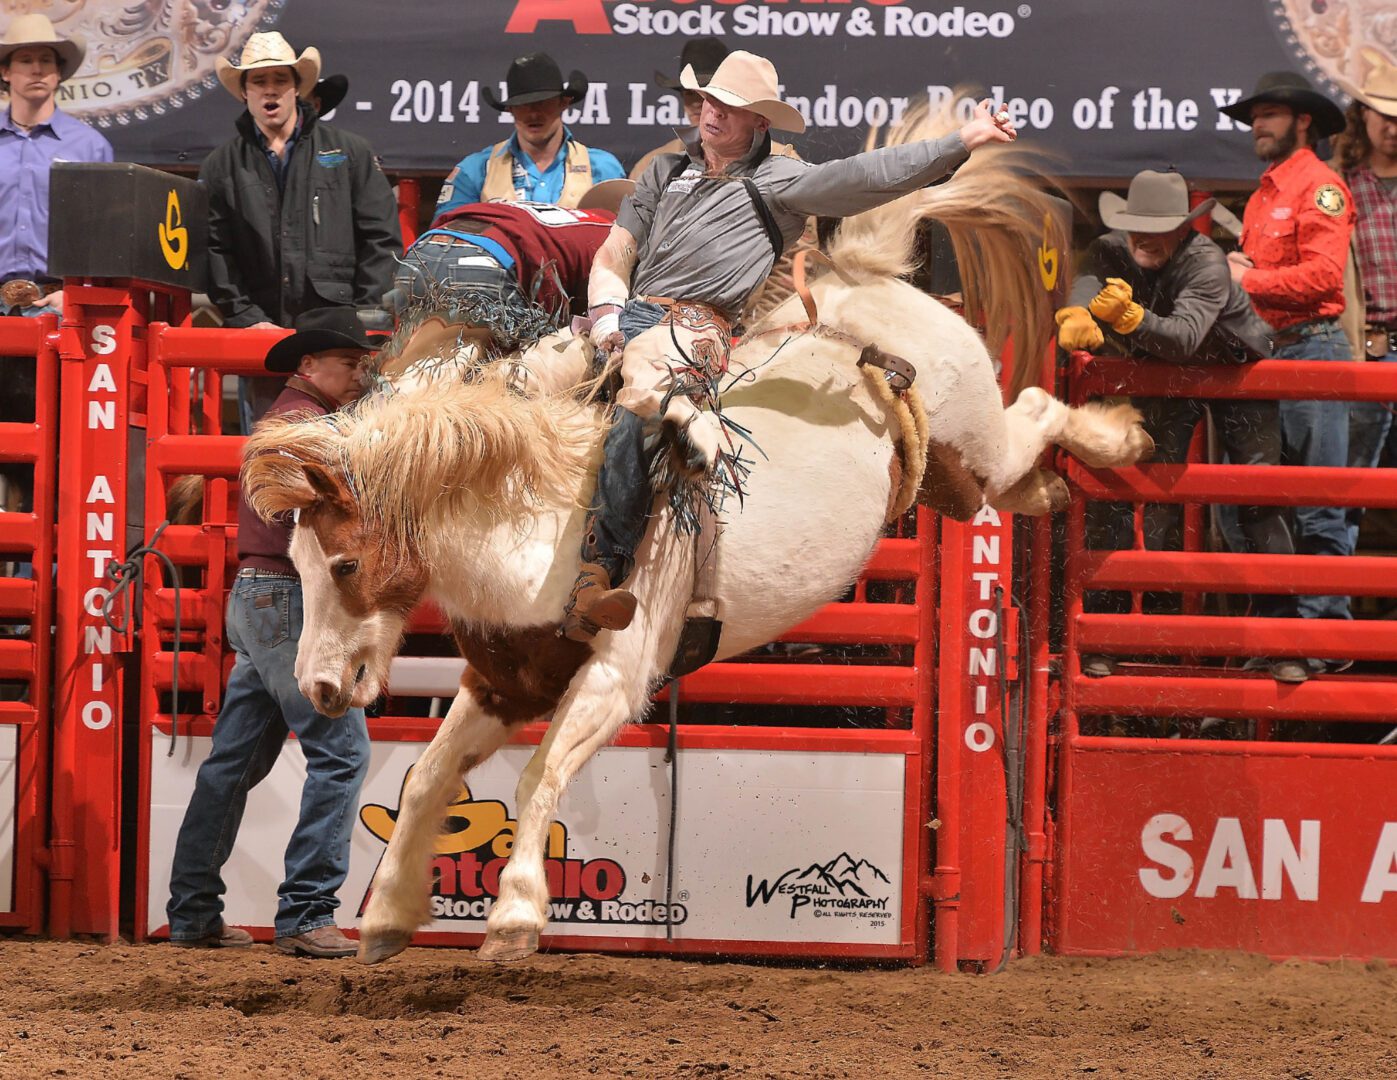 Jayne living his rodeo dreams - The Rodeo News